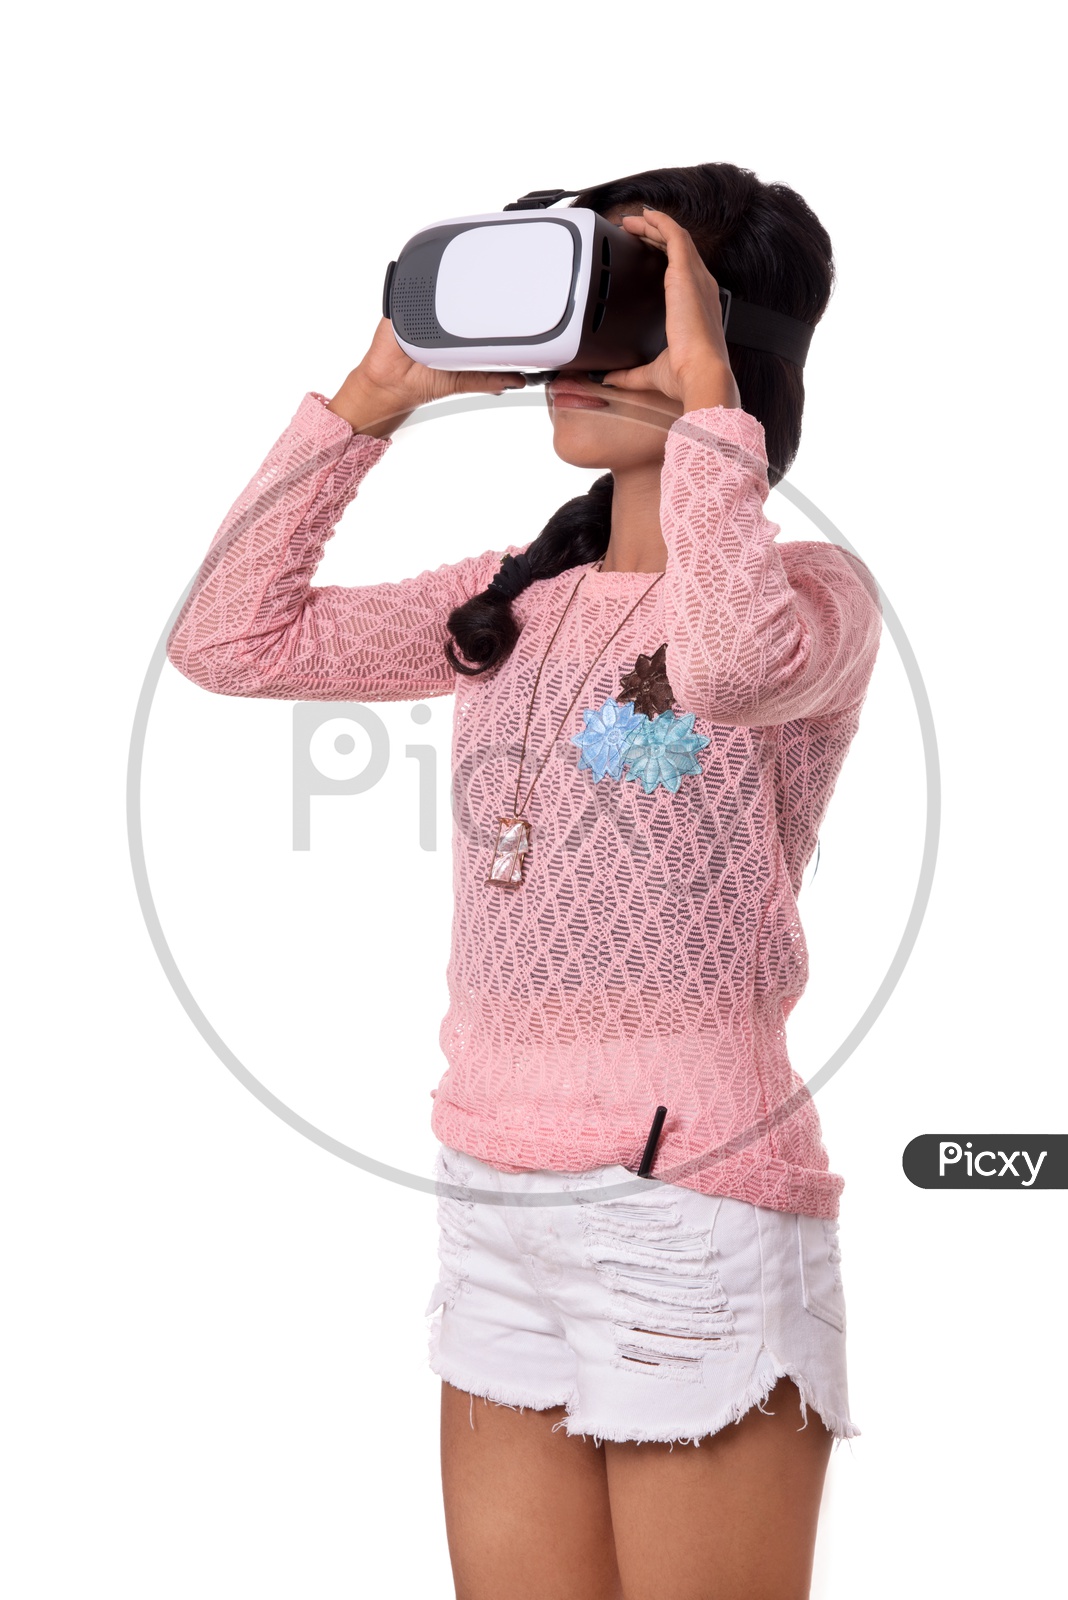 Young Girl Looking Through VR Device , Indian Girl Experiencing The Virtual Reality Headset